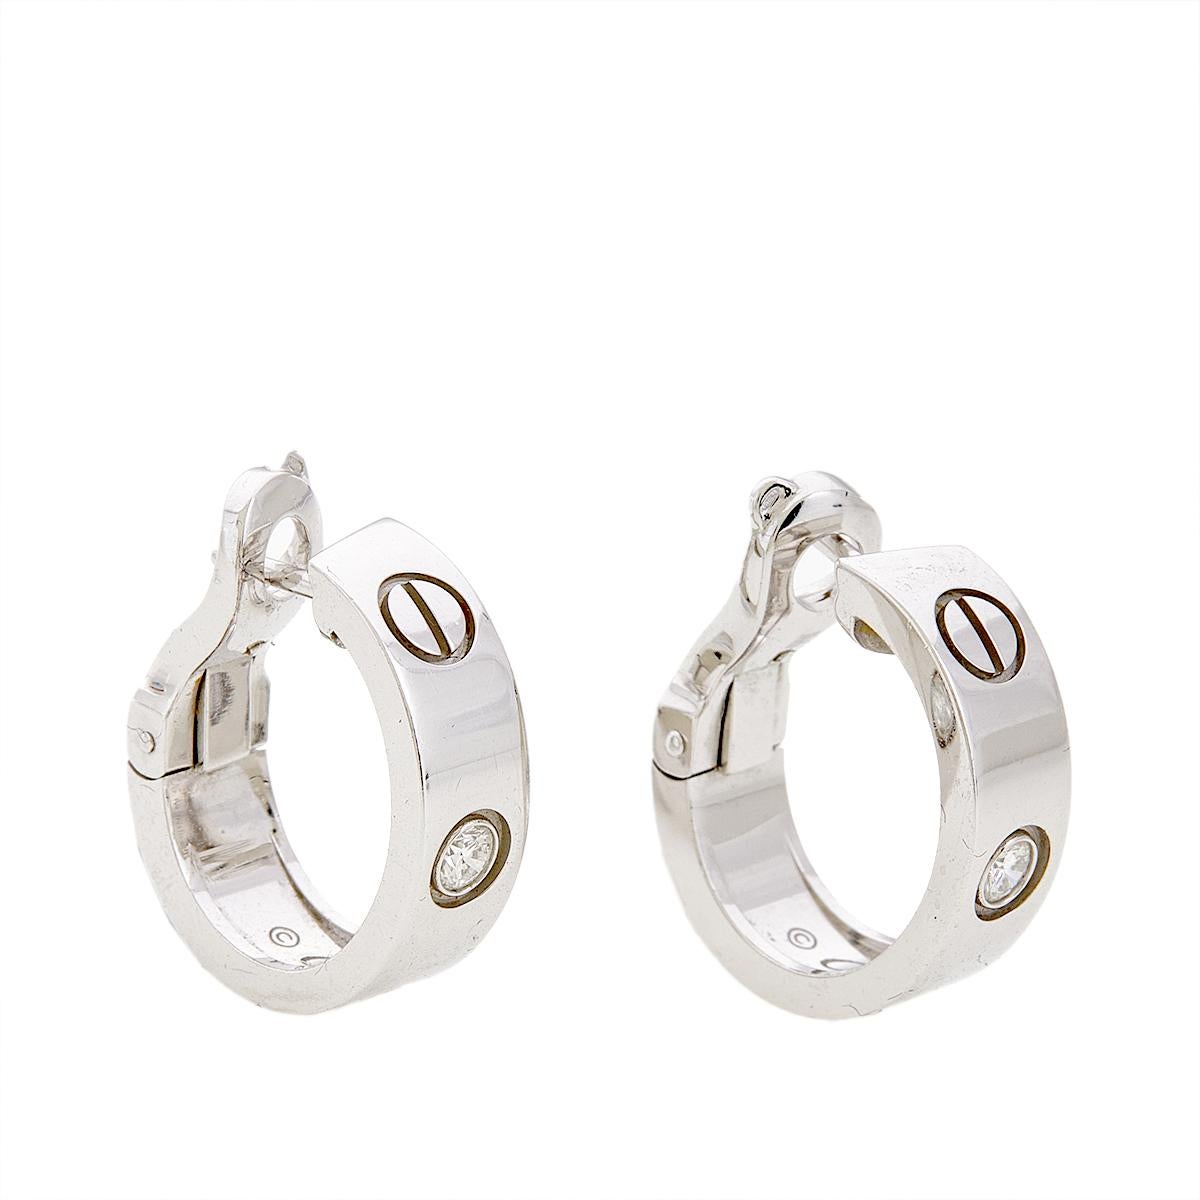 All one needs is a glance at these earrings to imagine how beautifully they'll sit on the ears. They come in a design of hoops sculpted from 18k white gold and detailed with the signature screw motifs as well as diamonds. They are not just easy to